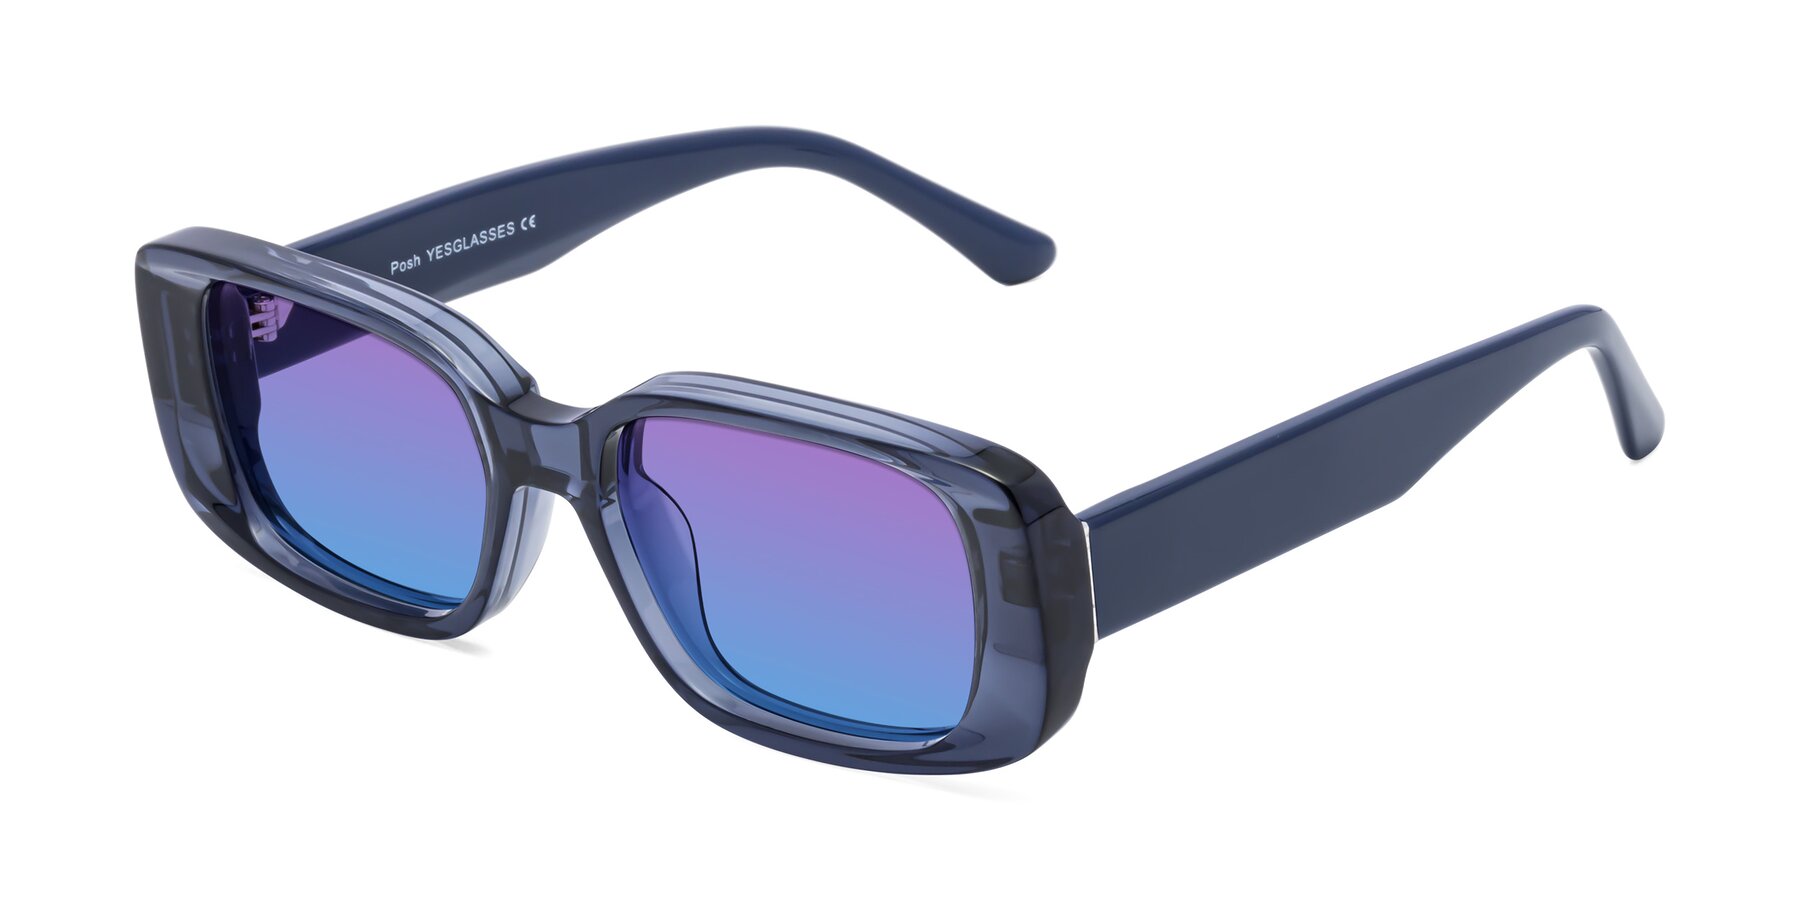 Angle of Posh in Translucent Blue with Purple / Blue Gradient Lenses